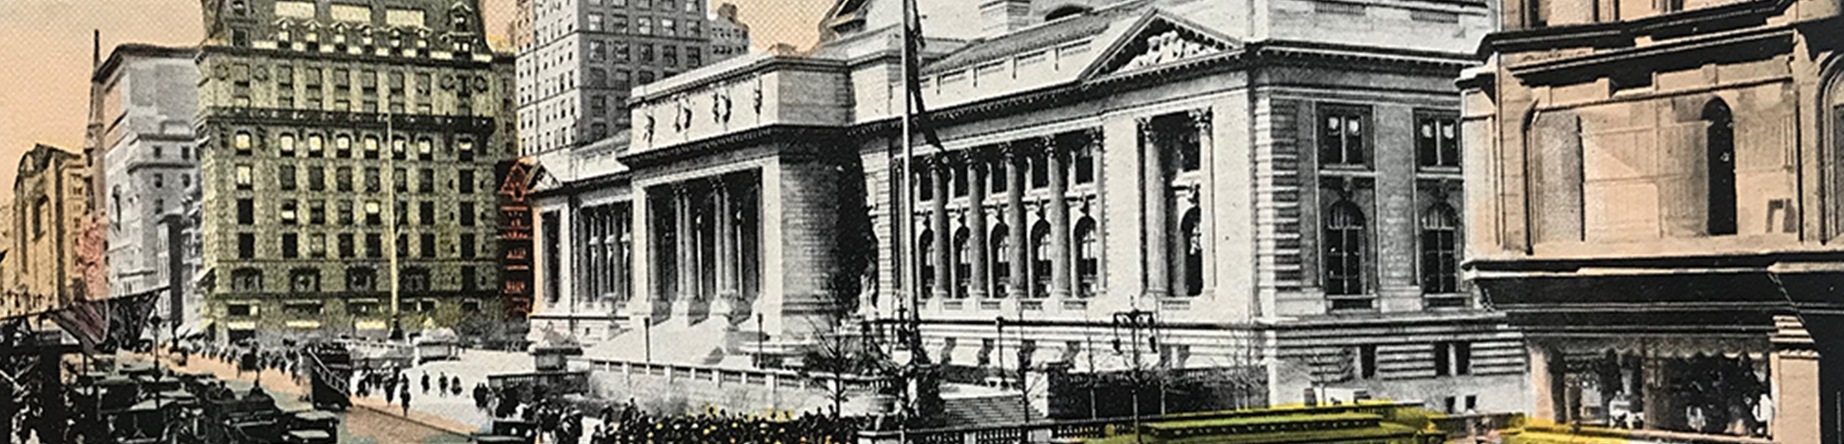 Detail of vintage postcard of the New York Library